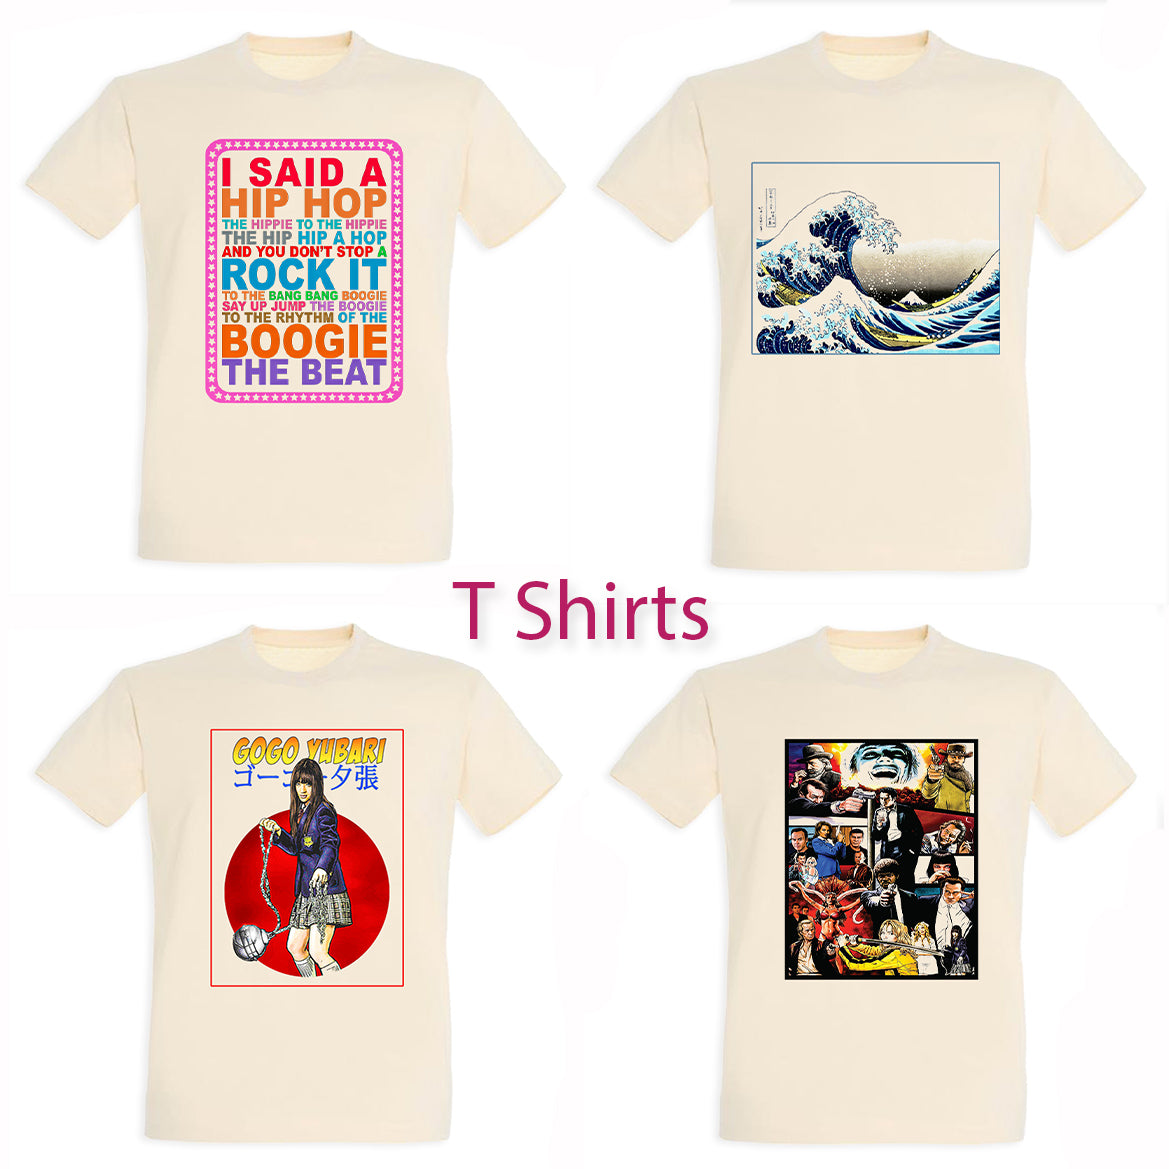 All T Shirts